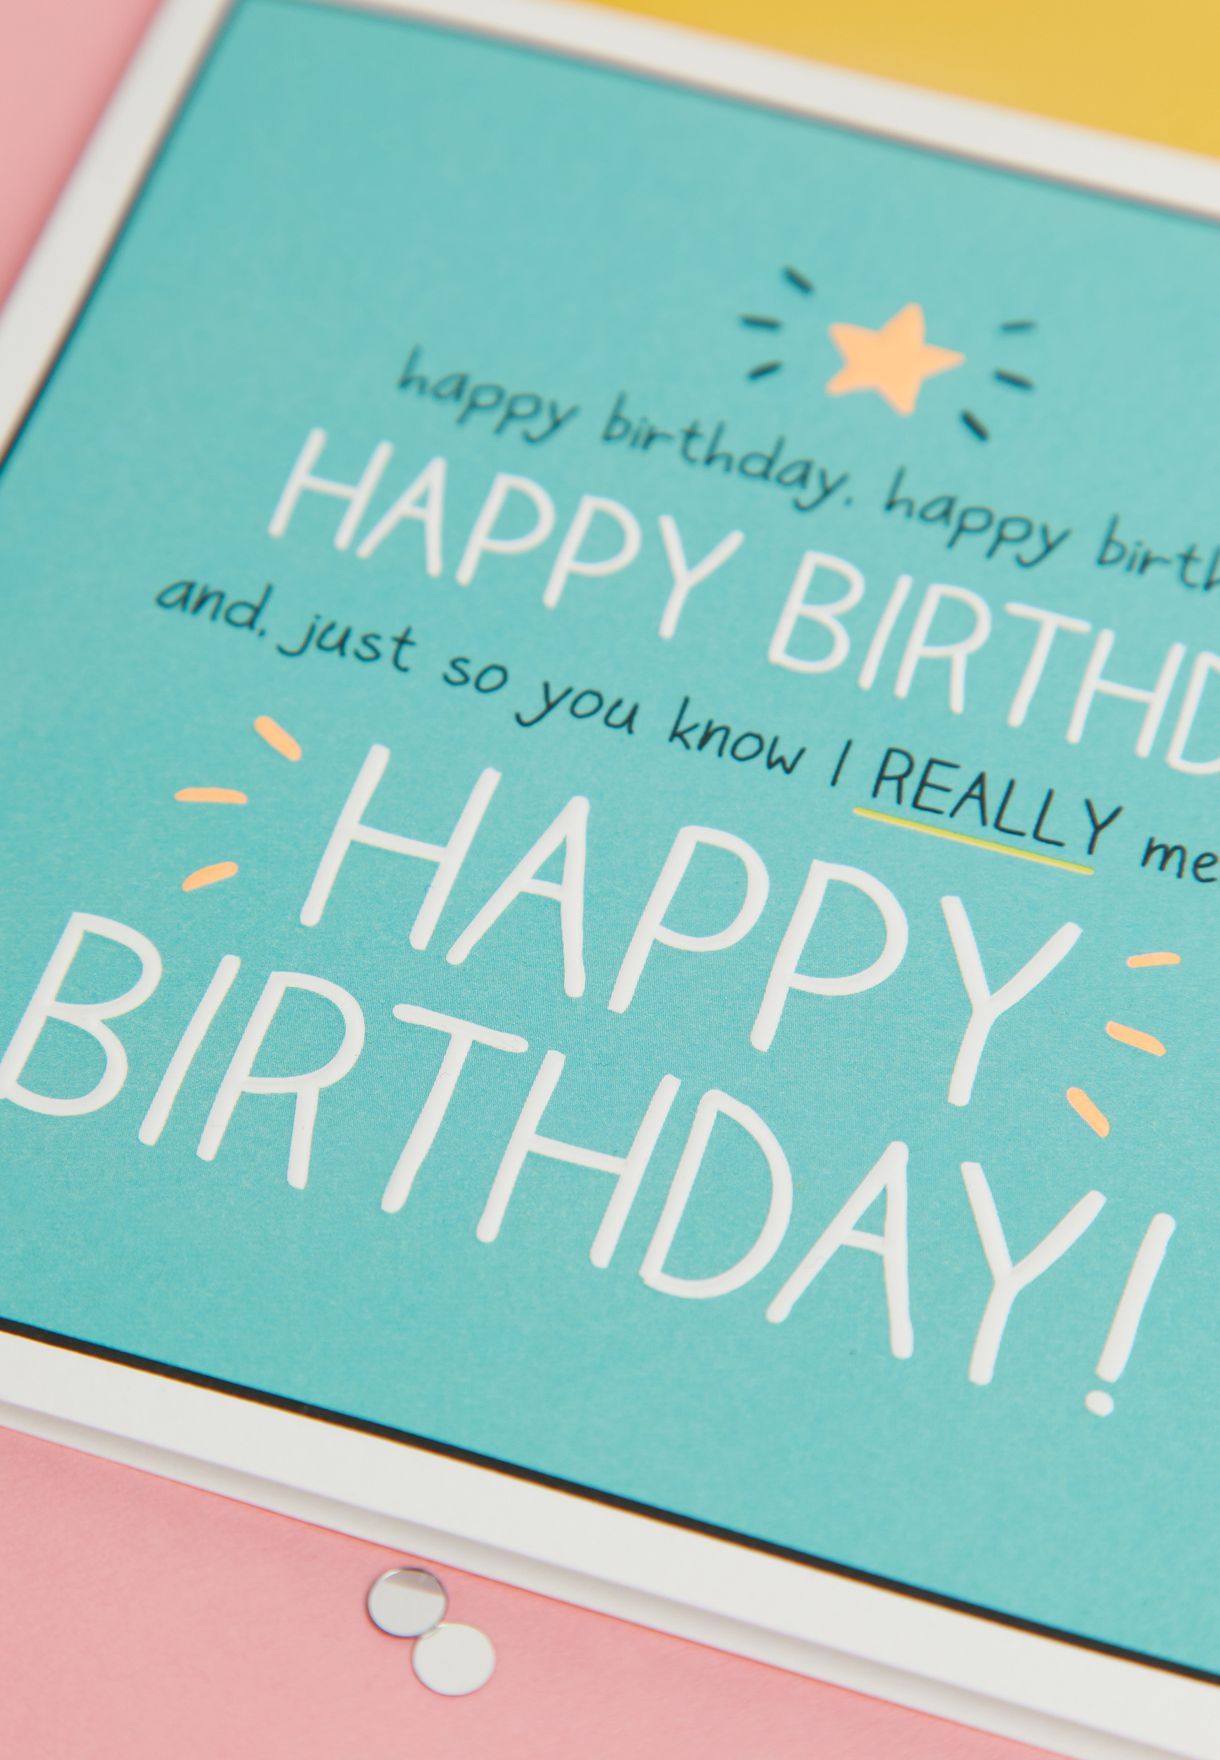 Happy Birthday Really Mean It Card